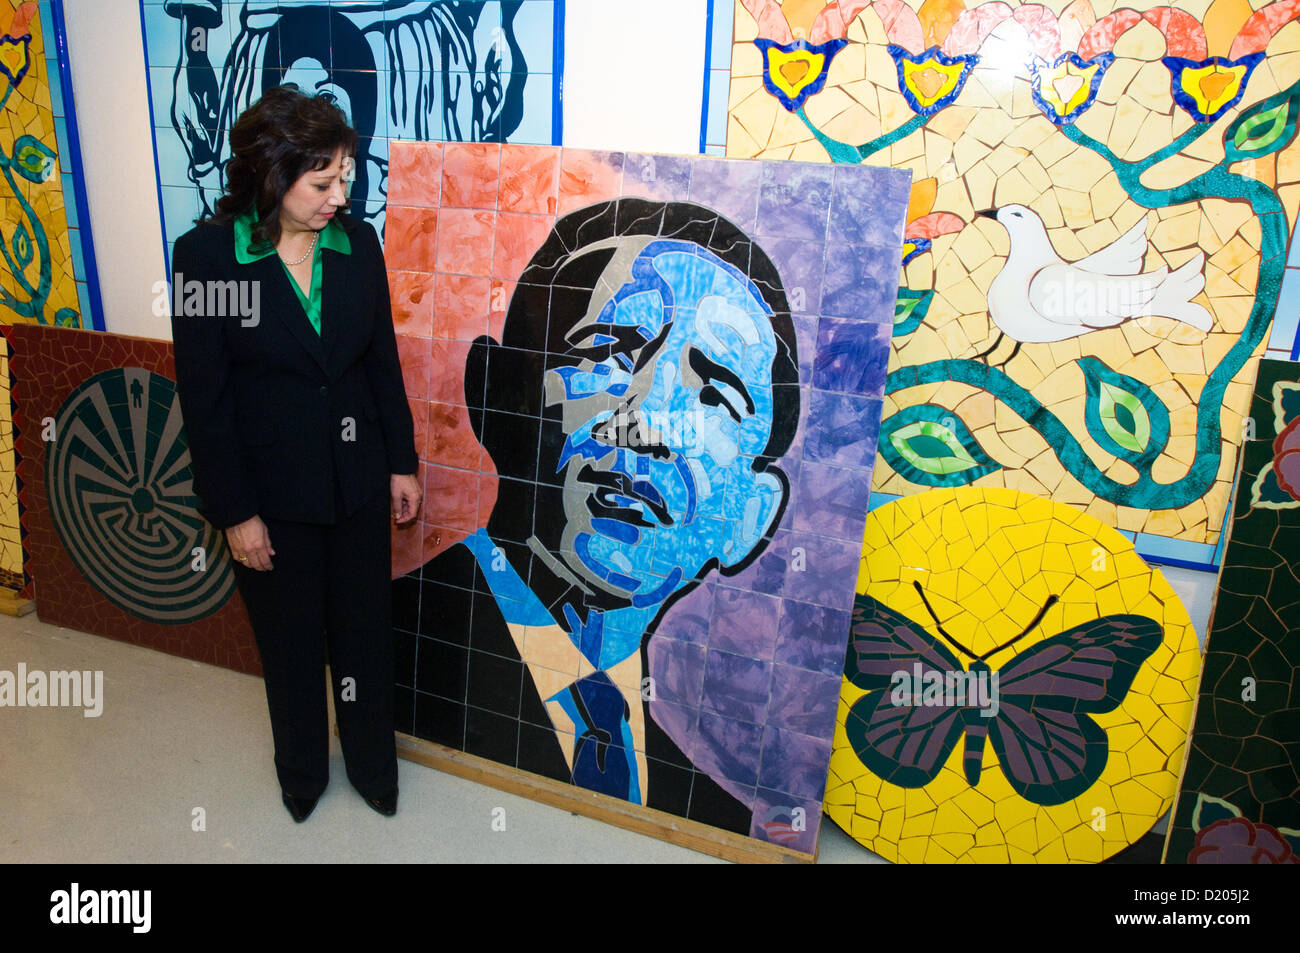 Feb. 16, 2010 - Tucson, Arizona, U.S - Secretary of Labor GILDA SOLIS looks at a mosaic of President BARACK OBAMA at Las Artes in Tucson, Ariz. in Feb. 2010.  Las Artes is an employment training center focusing on helping high school dropouts earn their GEDs while learning artistic trades including tilework and painting. (Credit Image: © Will Seberger/ZUMAPRESS.com) Stock Photo